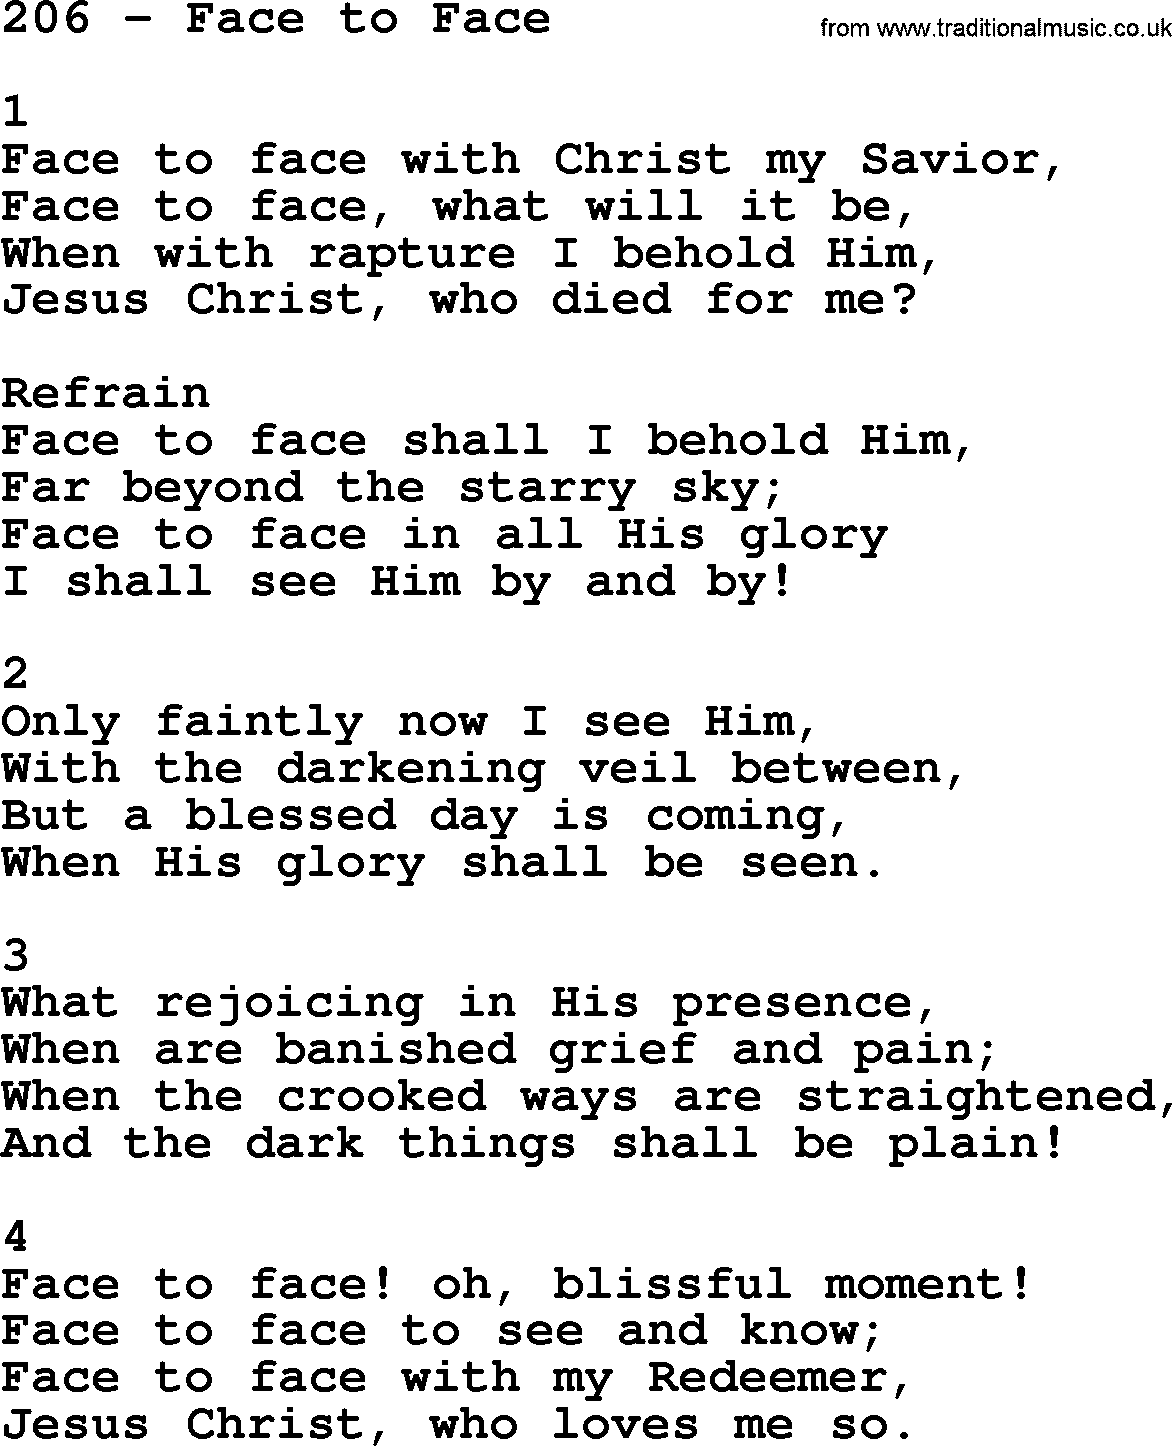 Complete Adventis Hymnal, title: 206-Face To Face, with lyrics, midi, mp3, powerpoints(PPT) and PDF,